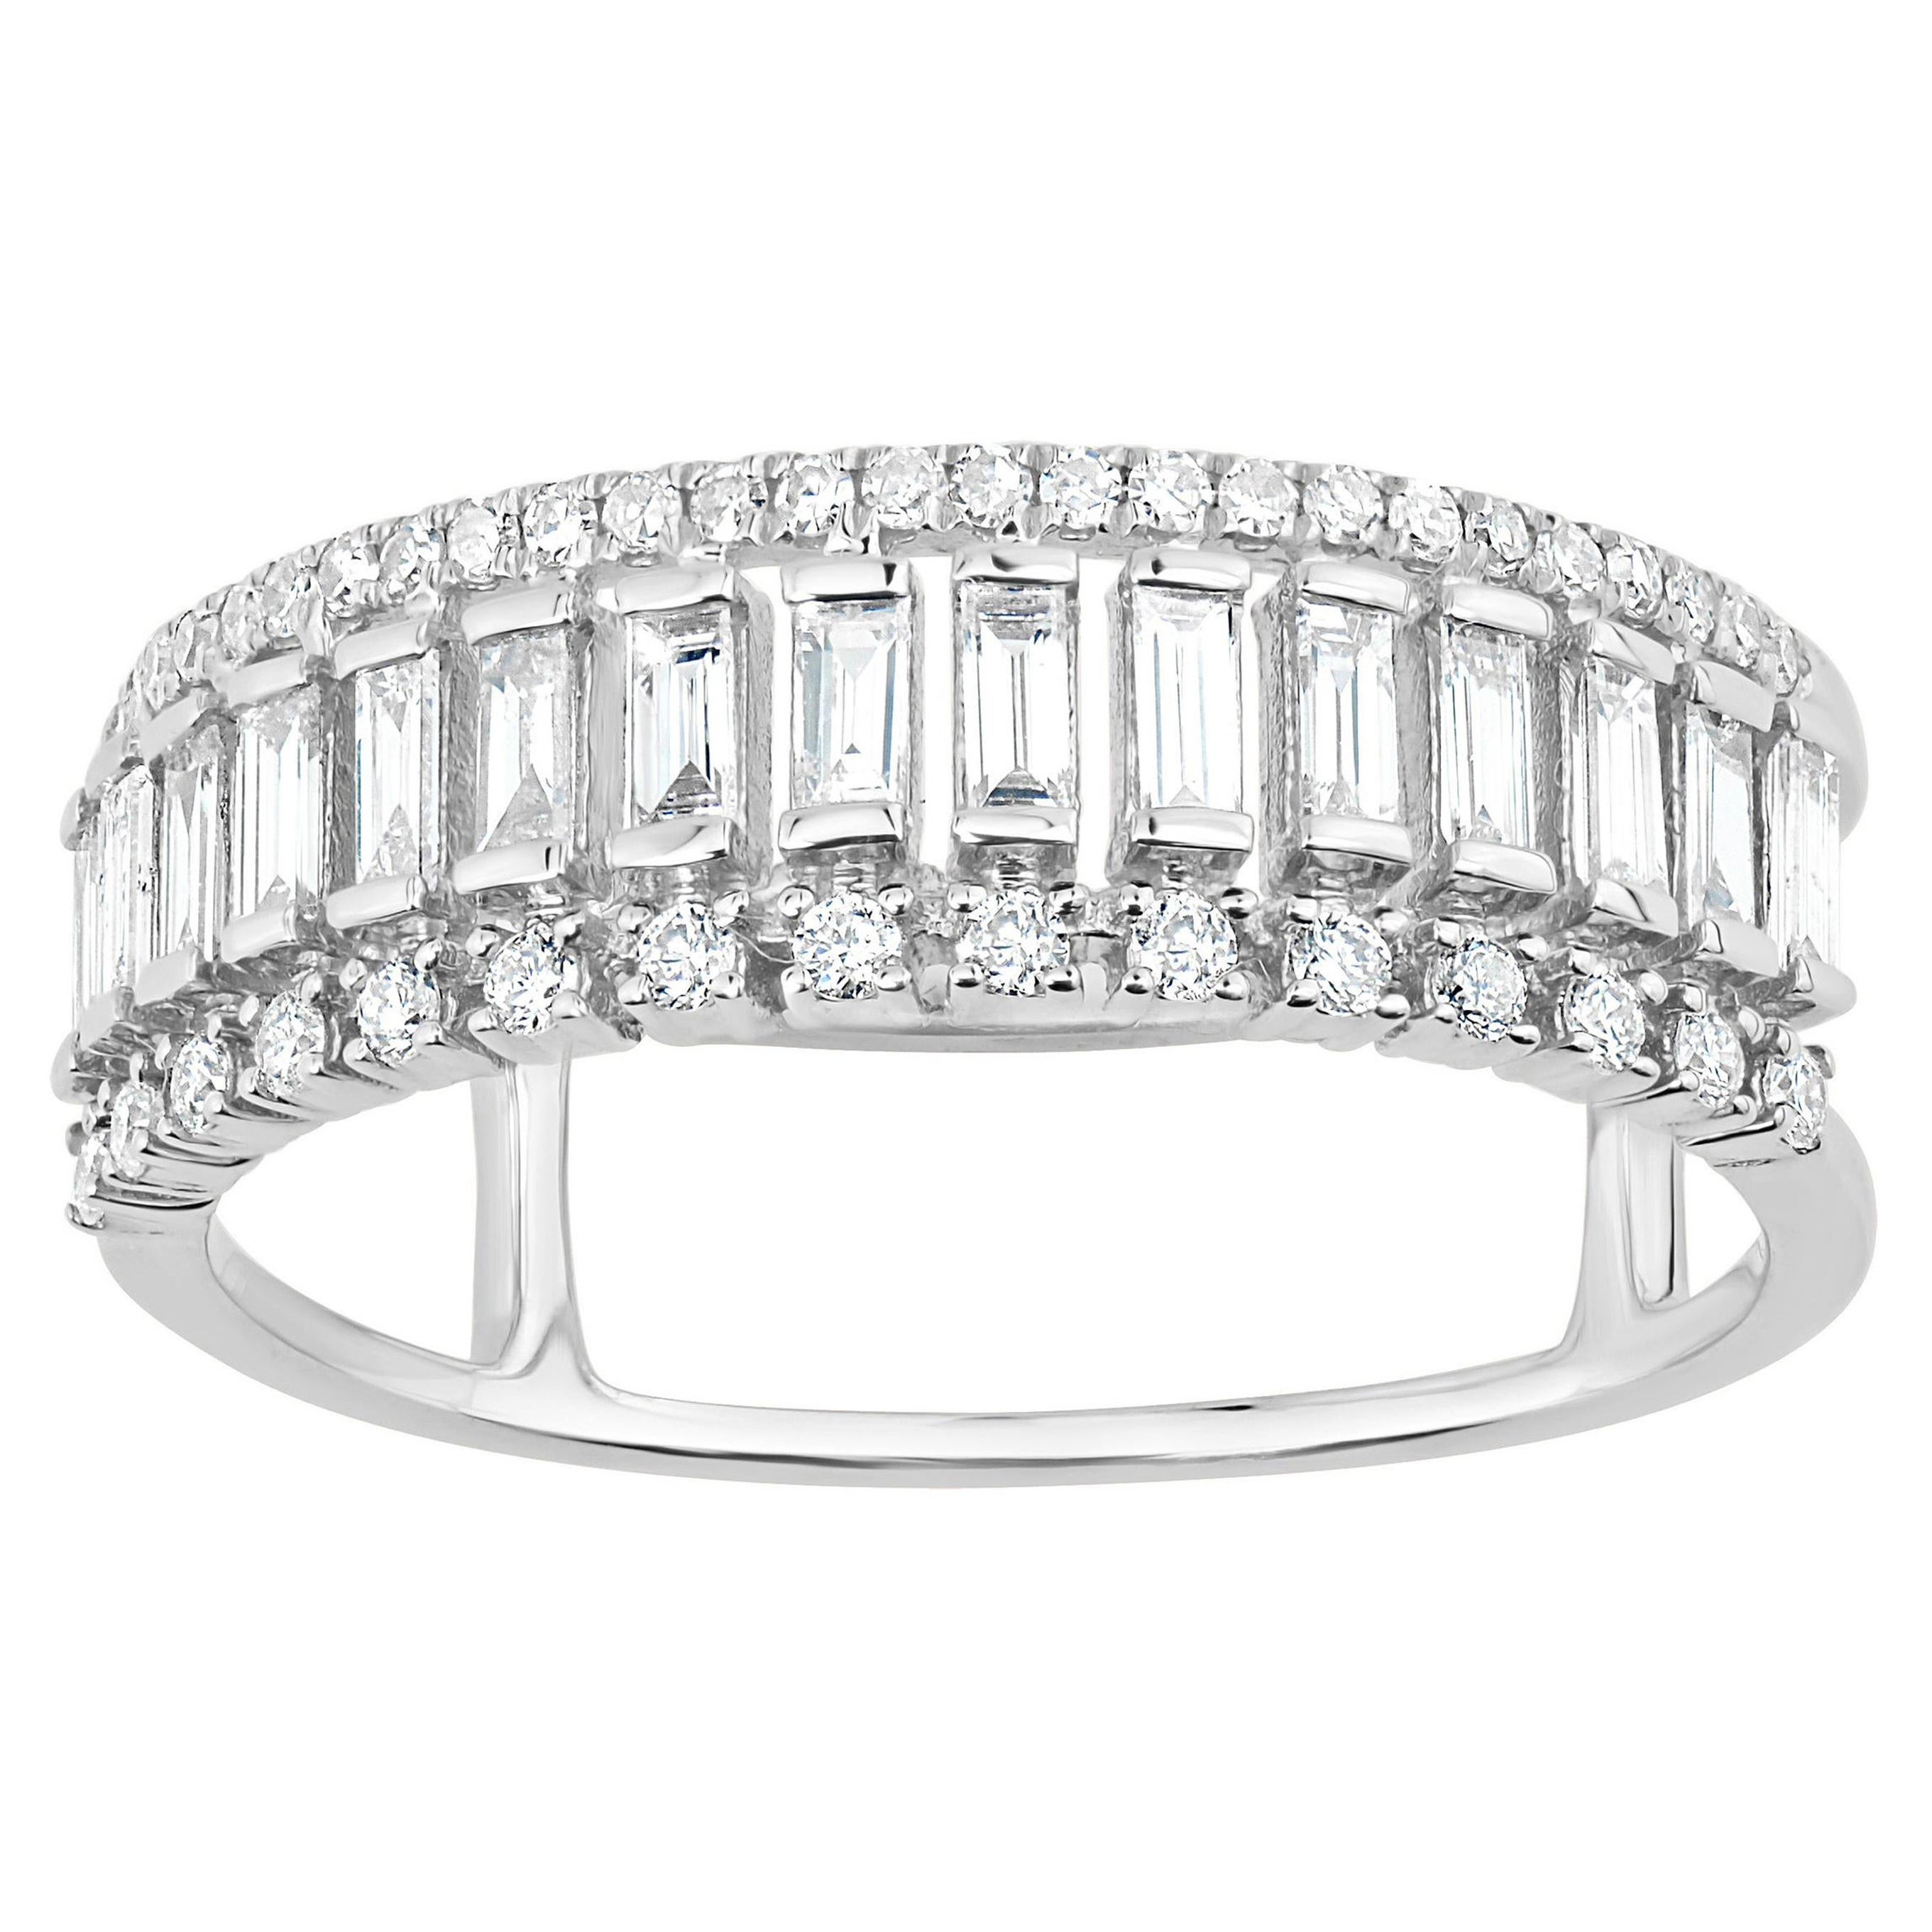 Luxle 0.56cttw Baguette and Round Diamond Band Ring in 18k White Gold